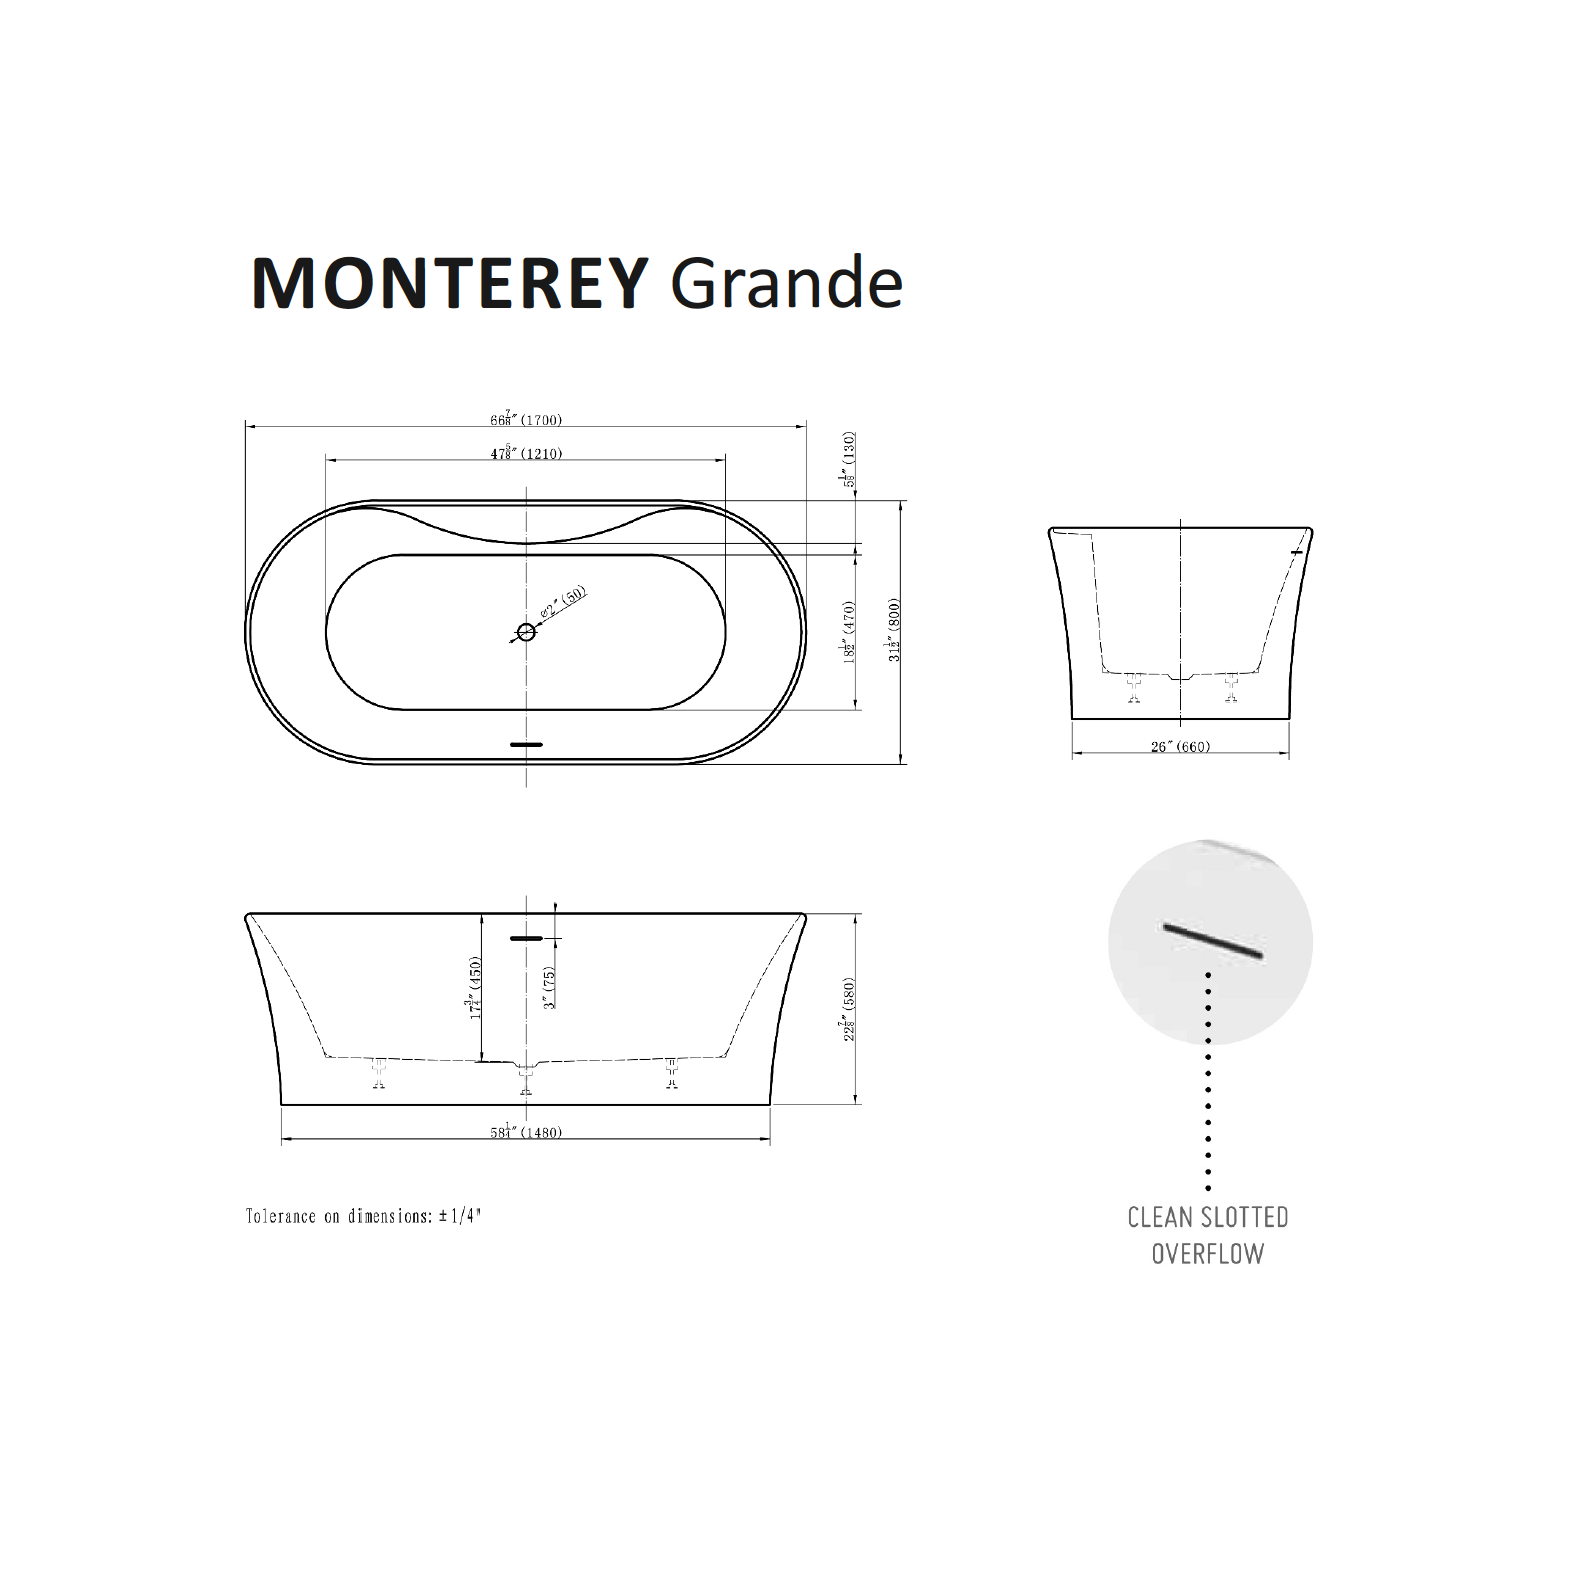 Monterey Grand Tub Specifications